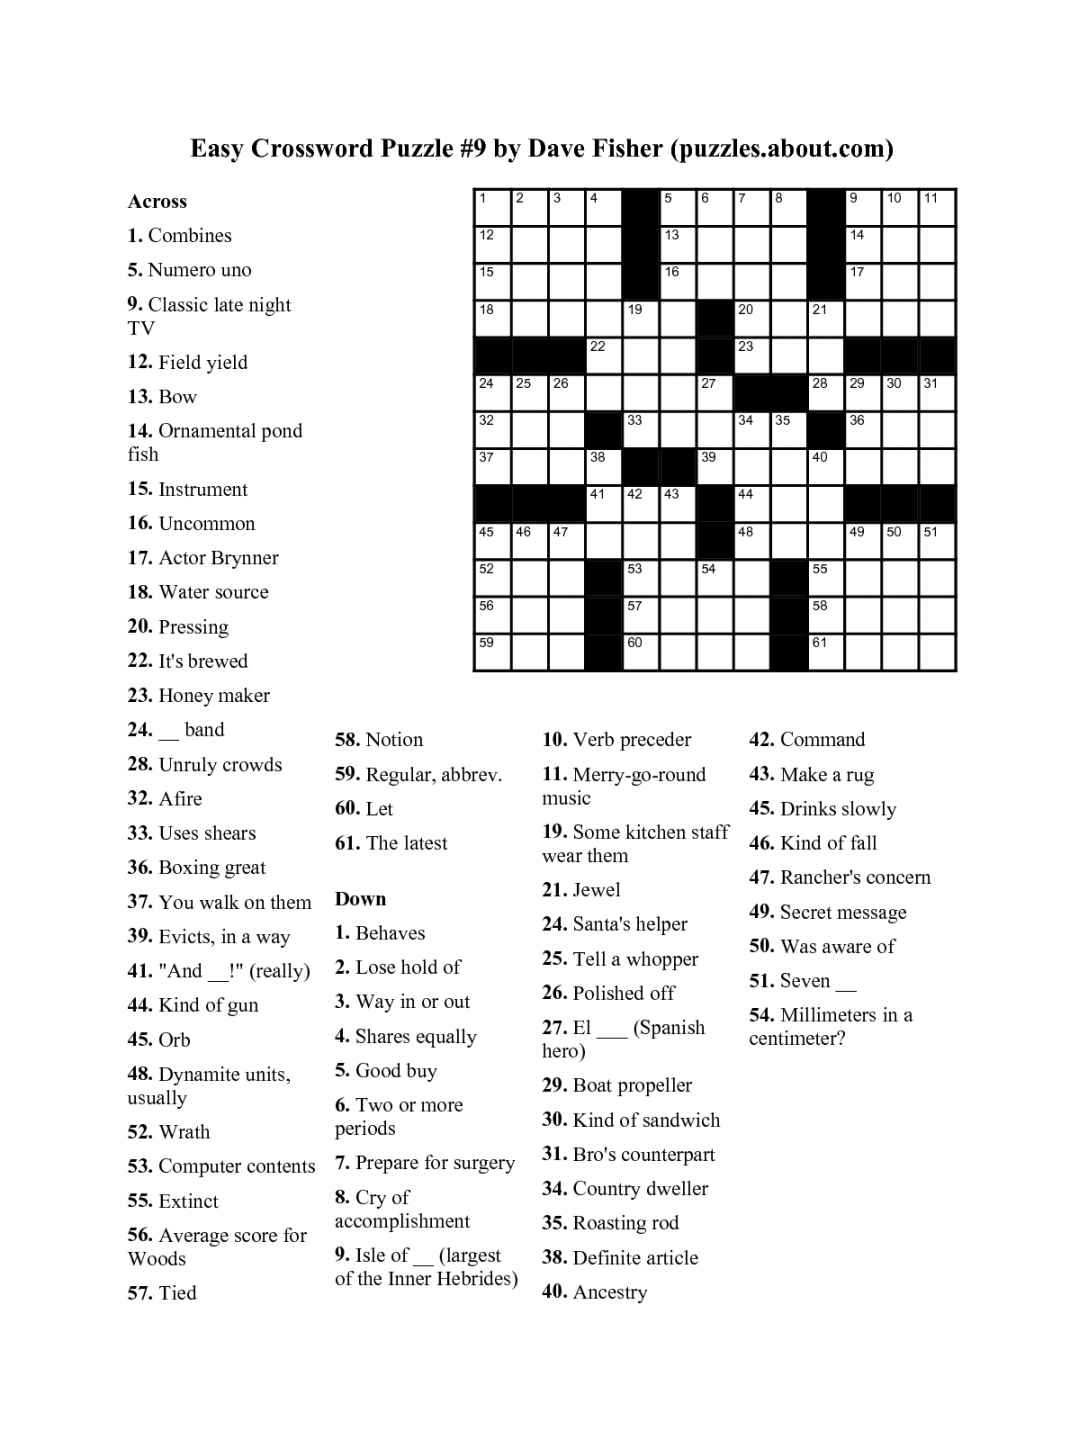 Easy Crossword Puzzle _ by Dave Fisher _puzzlesaboutcom_ by